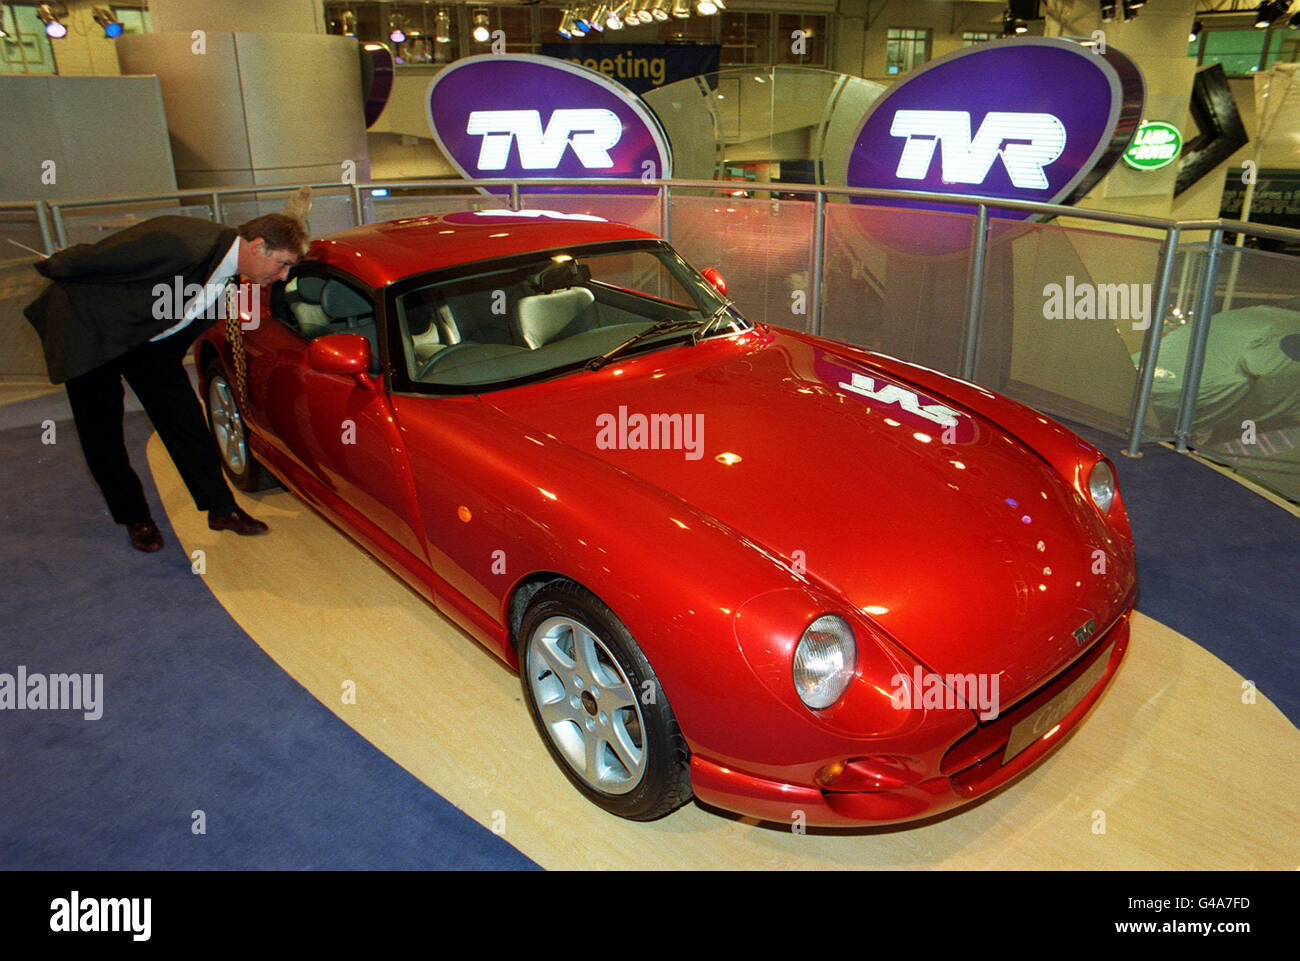 Blackpool-based TVR display their new Cerbera 4.2 litre, two-door fixed top coupe, in brilliant red, at the Earl's Court London Motor Show, today (Tuesday). Photo by Ben Curtis. Stock Photo